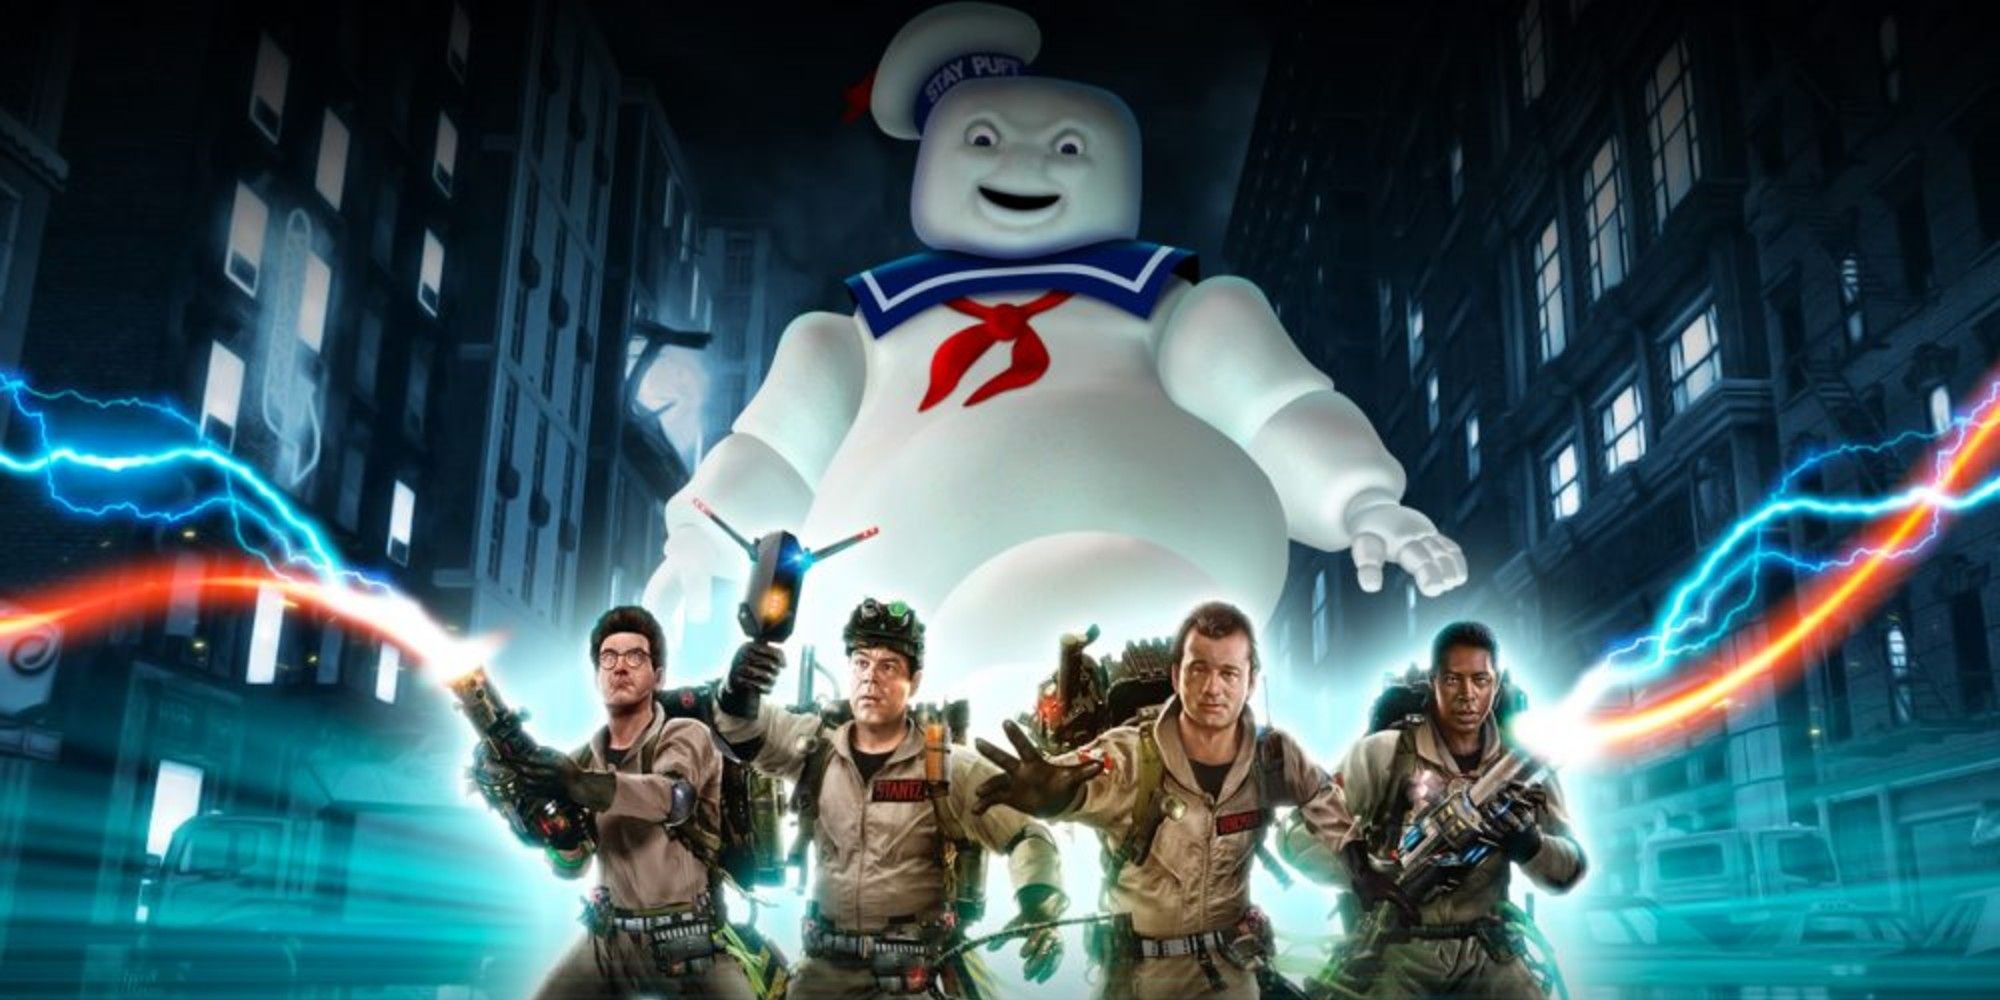 Ghostbusters 2009 video game